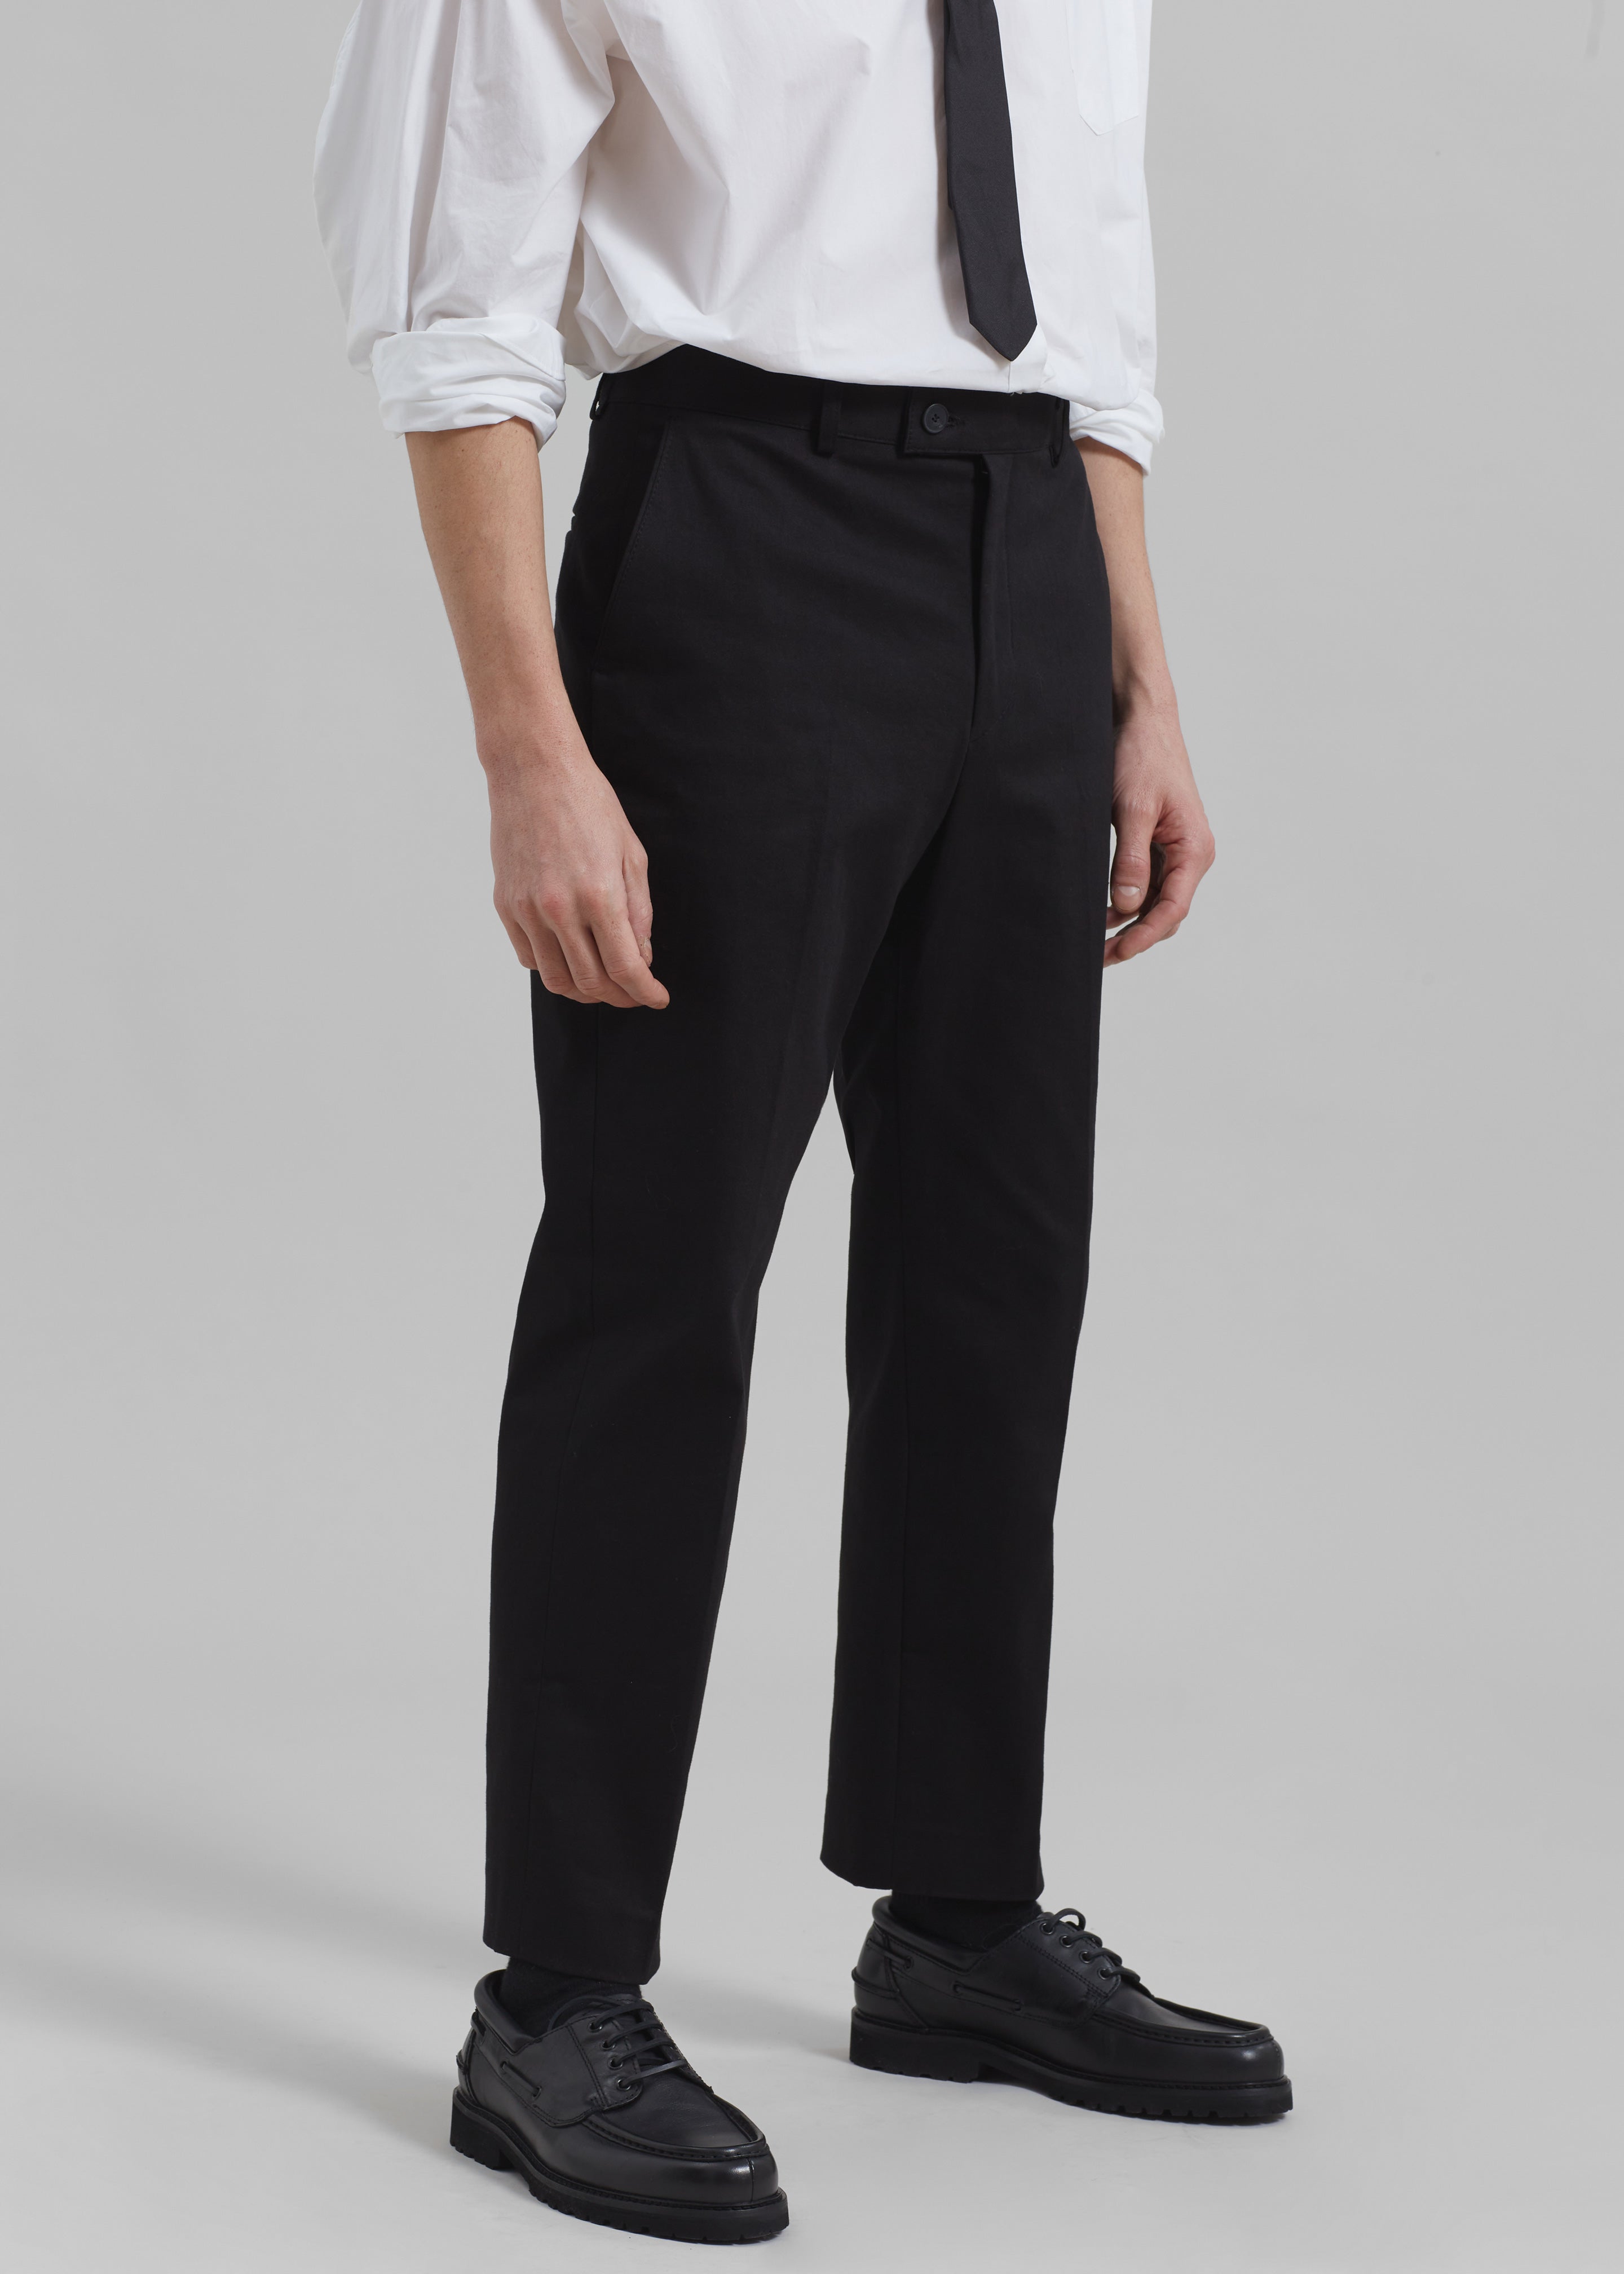 Gregory Trousers - Black - 2